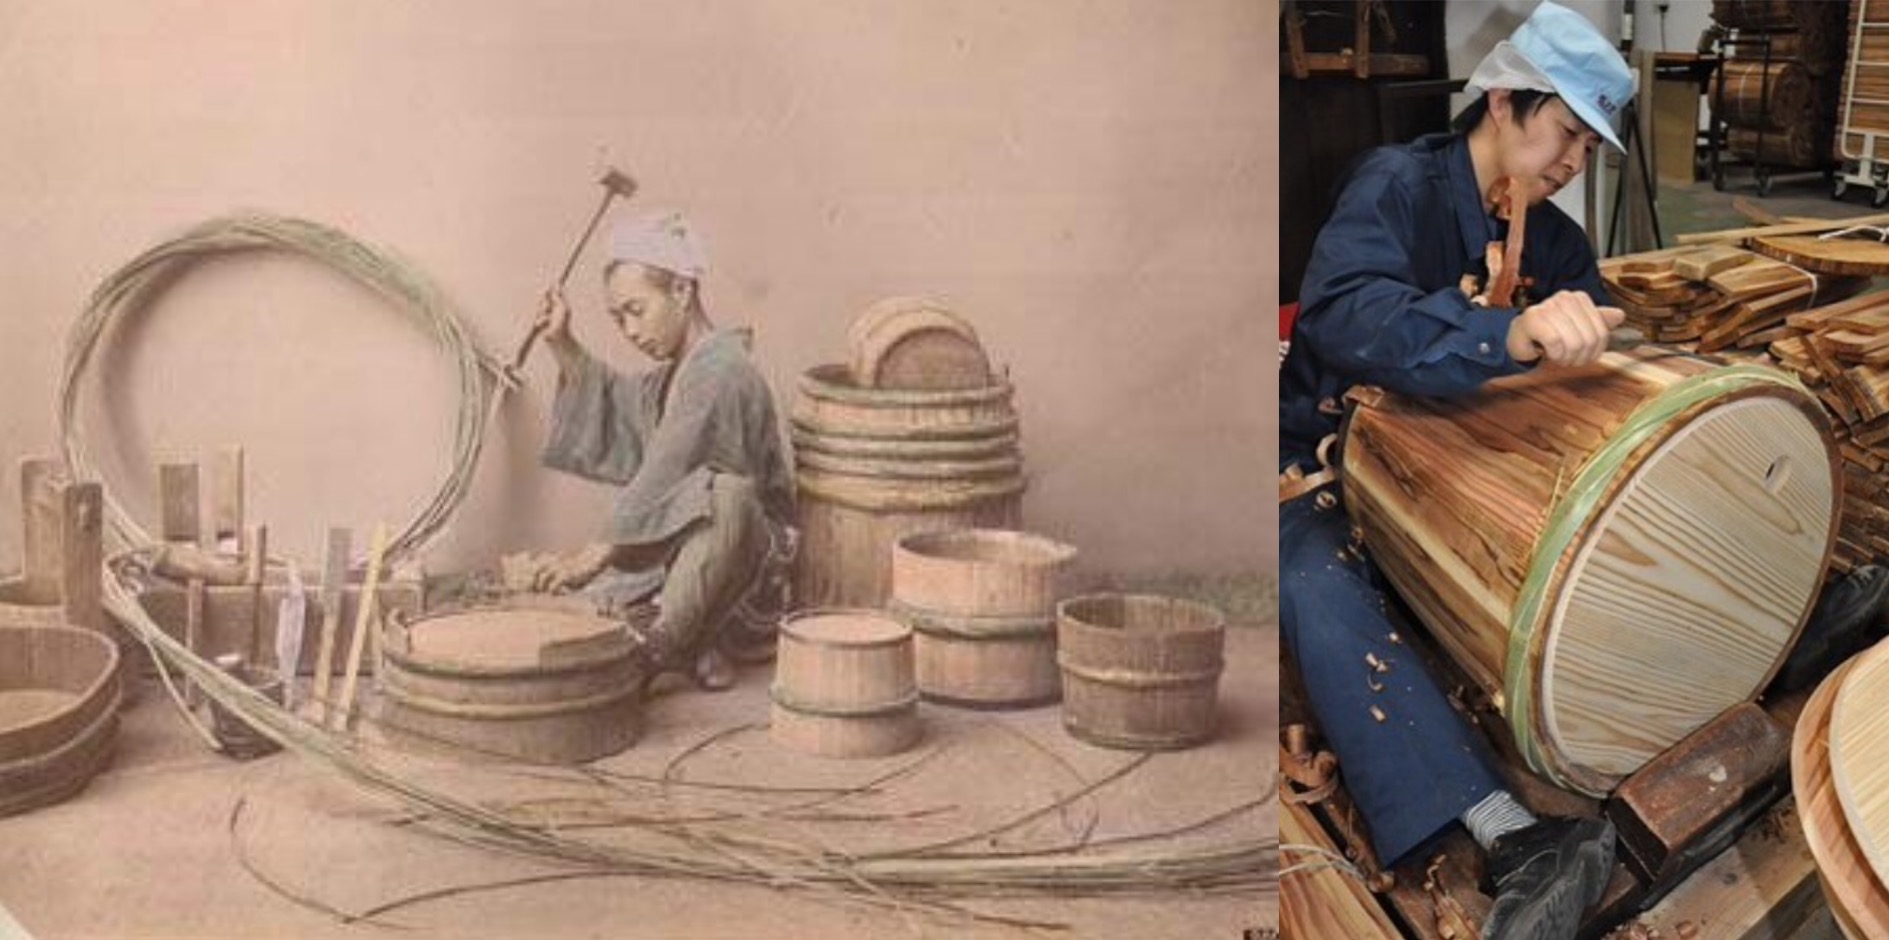 Left: Late 19th- to early-20th c. cooper. Right: a 21st c. cooper making a sake barrel.